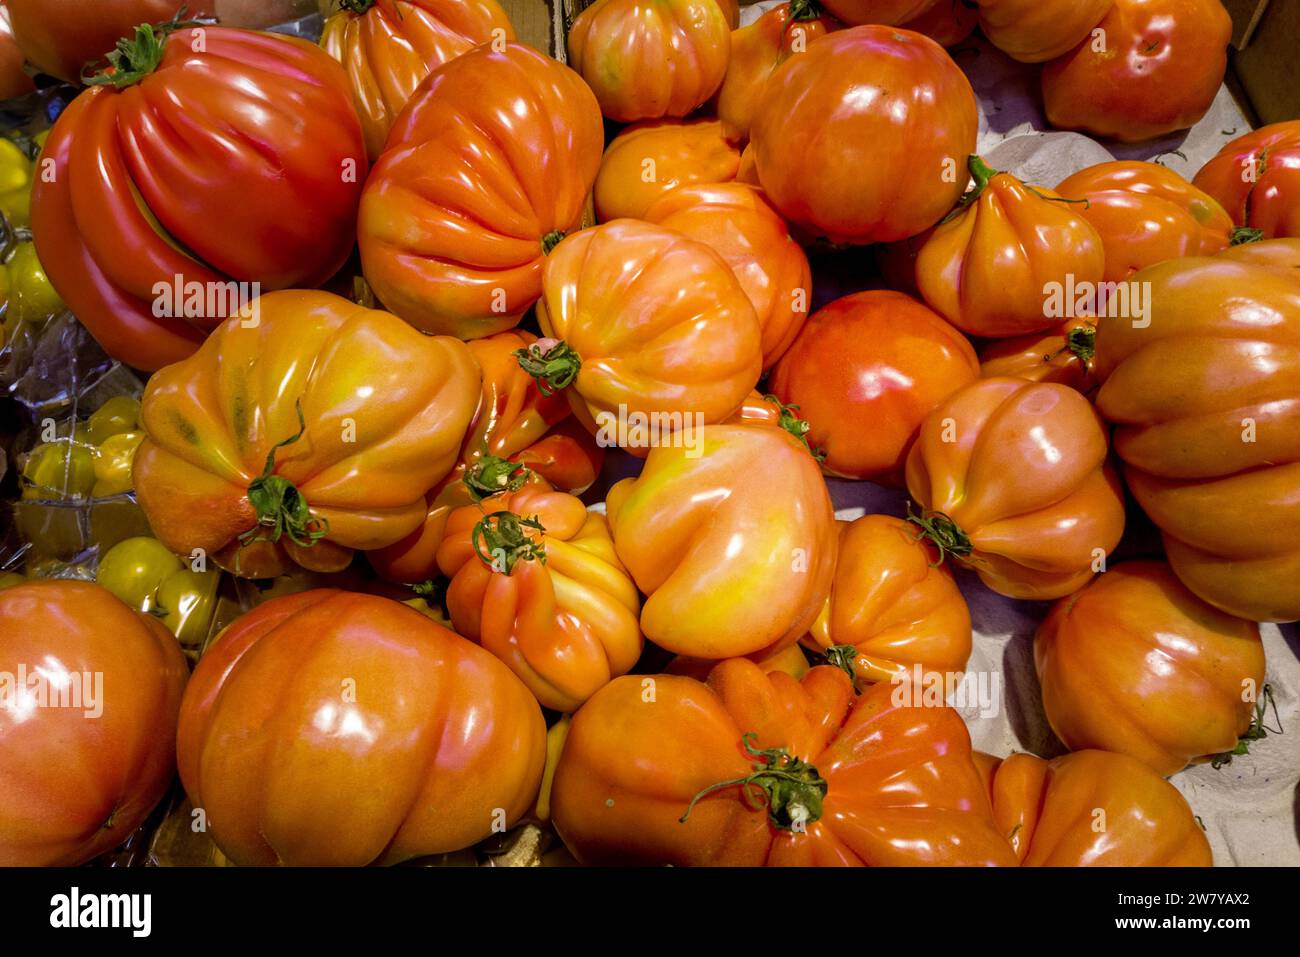 Oxheart tomatoes in top view in box Stock Photo